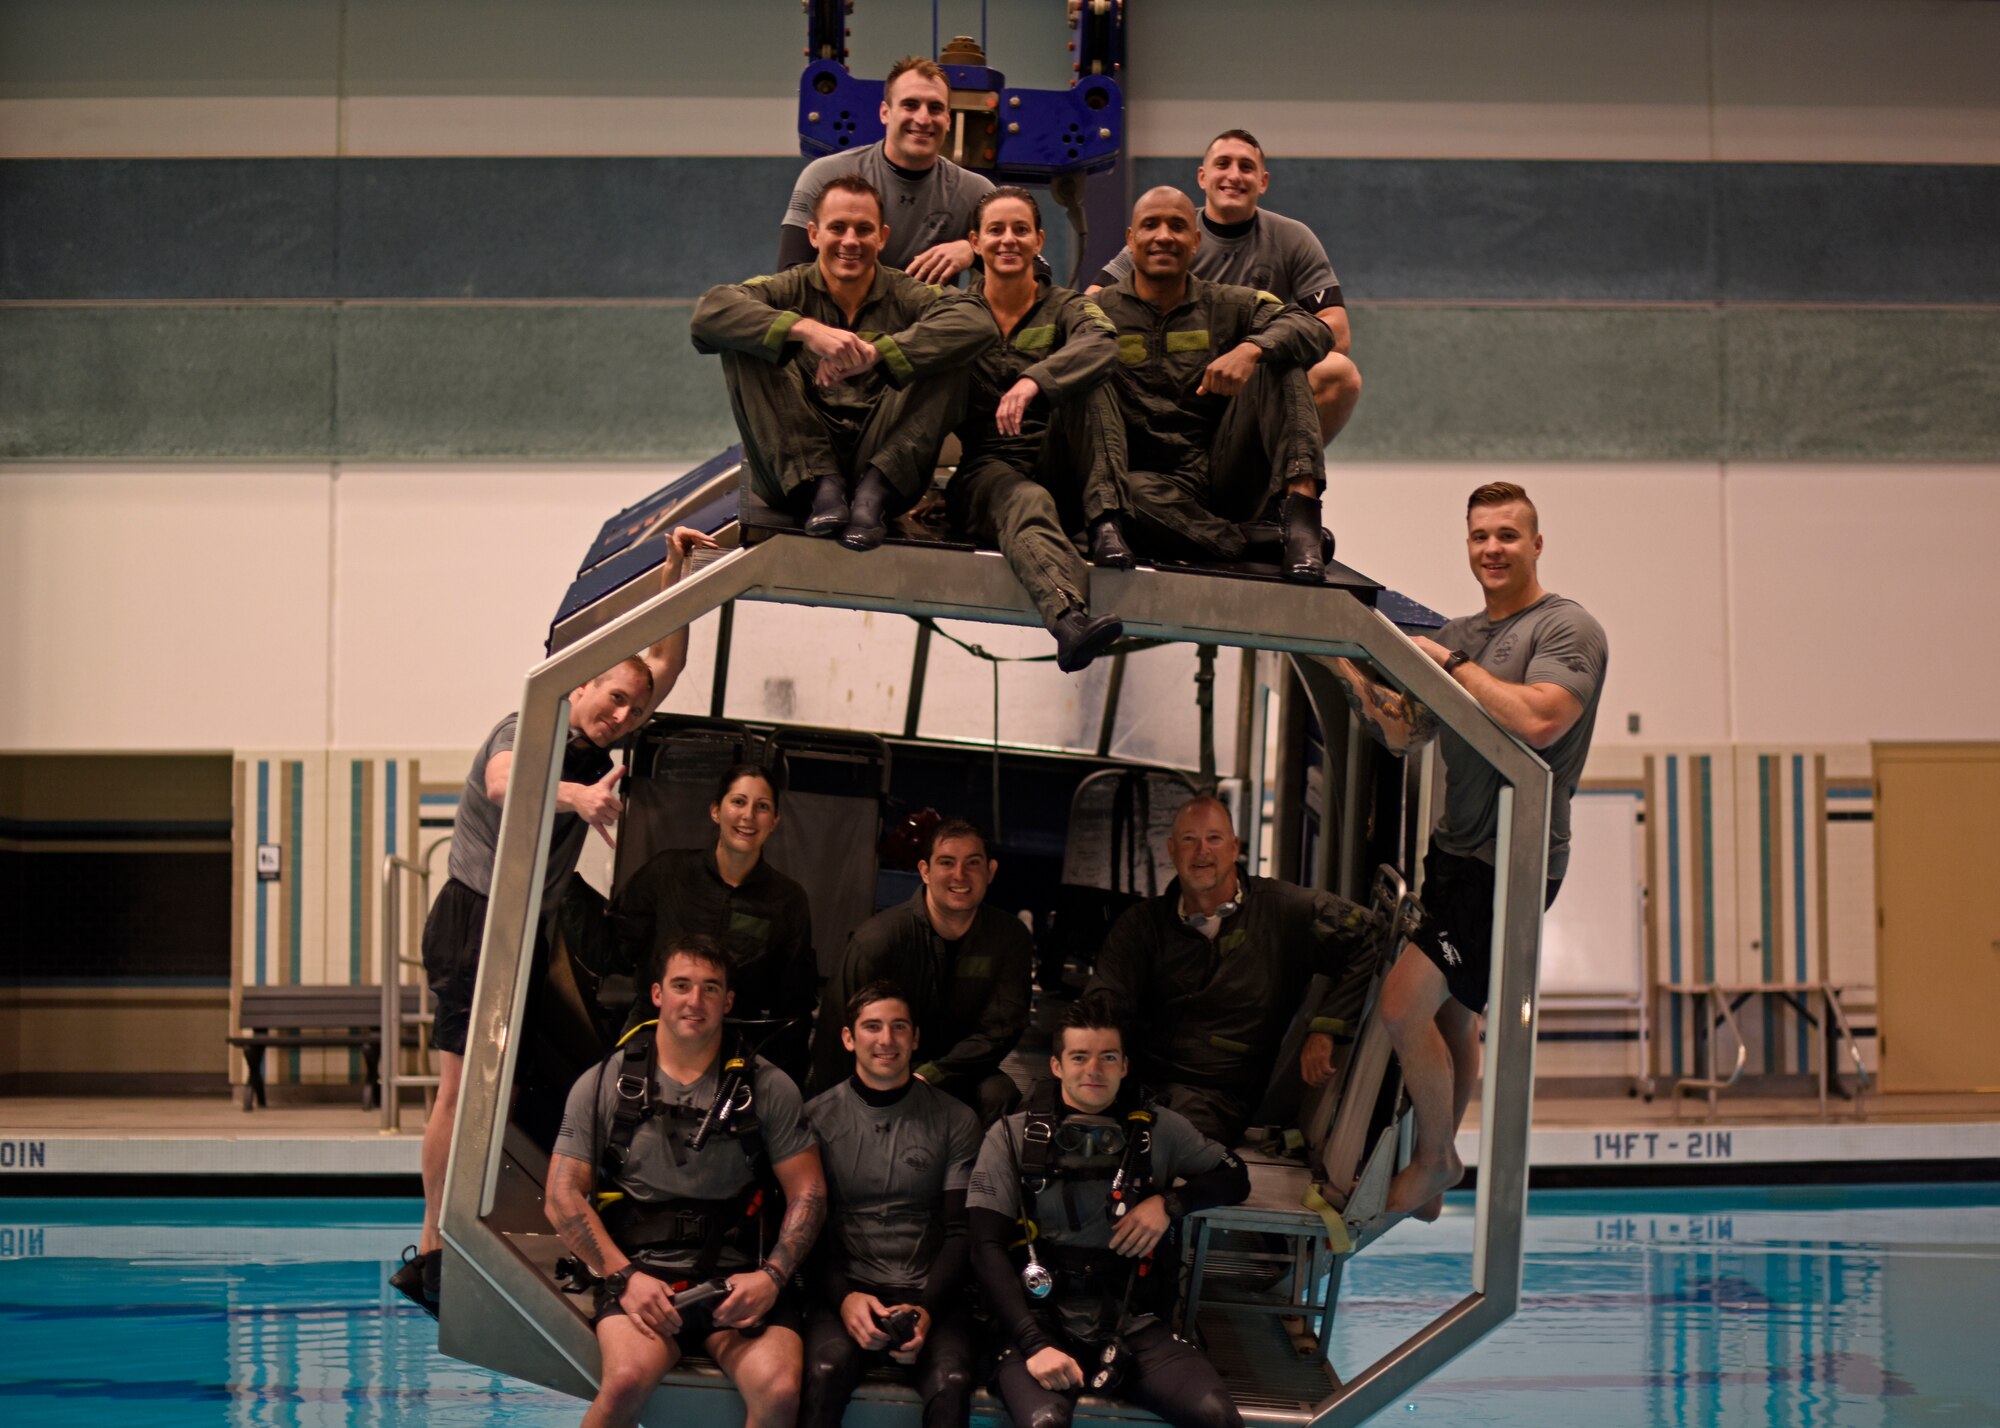 The NASA team and Survival, Evasion, Resistance and Escape specialist pose for a photo after completing the water survival course at Fairchild Air Force Base, Washington, May 18, 2018. The NASA team completed the dunker course. Trainees are strapped inside a modular egress training system that simulates a mock helicopter with lap belts that submerges into water and rotates to teach aircrew how to find their exits to safety. (U.S. Air Force photo/Airman 1st Class Jesenia Landaverde)